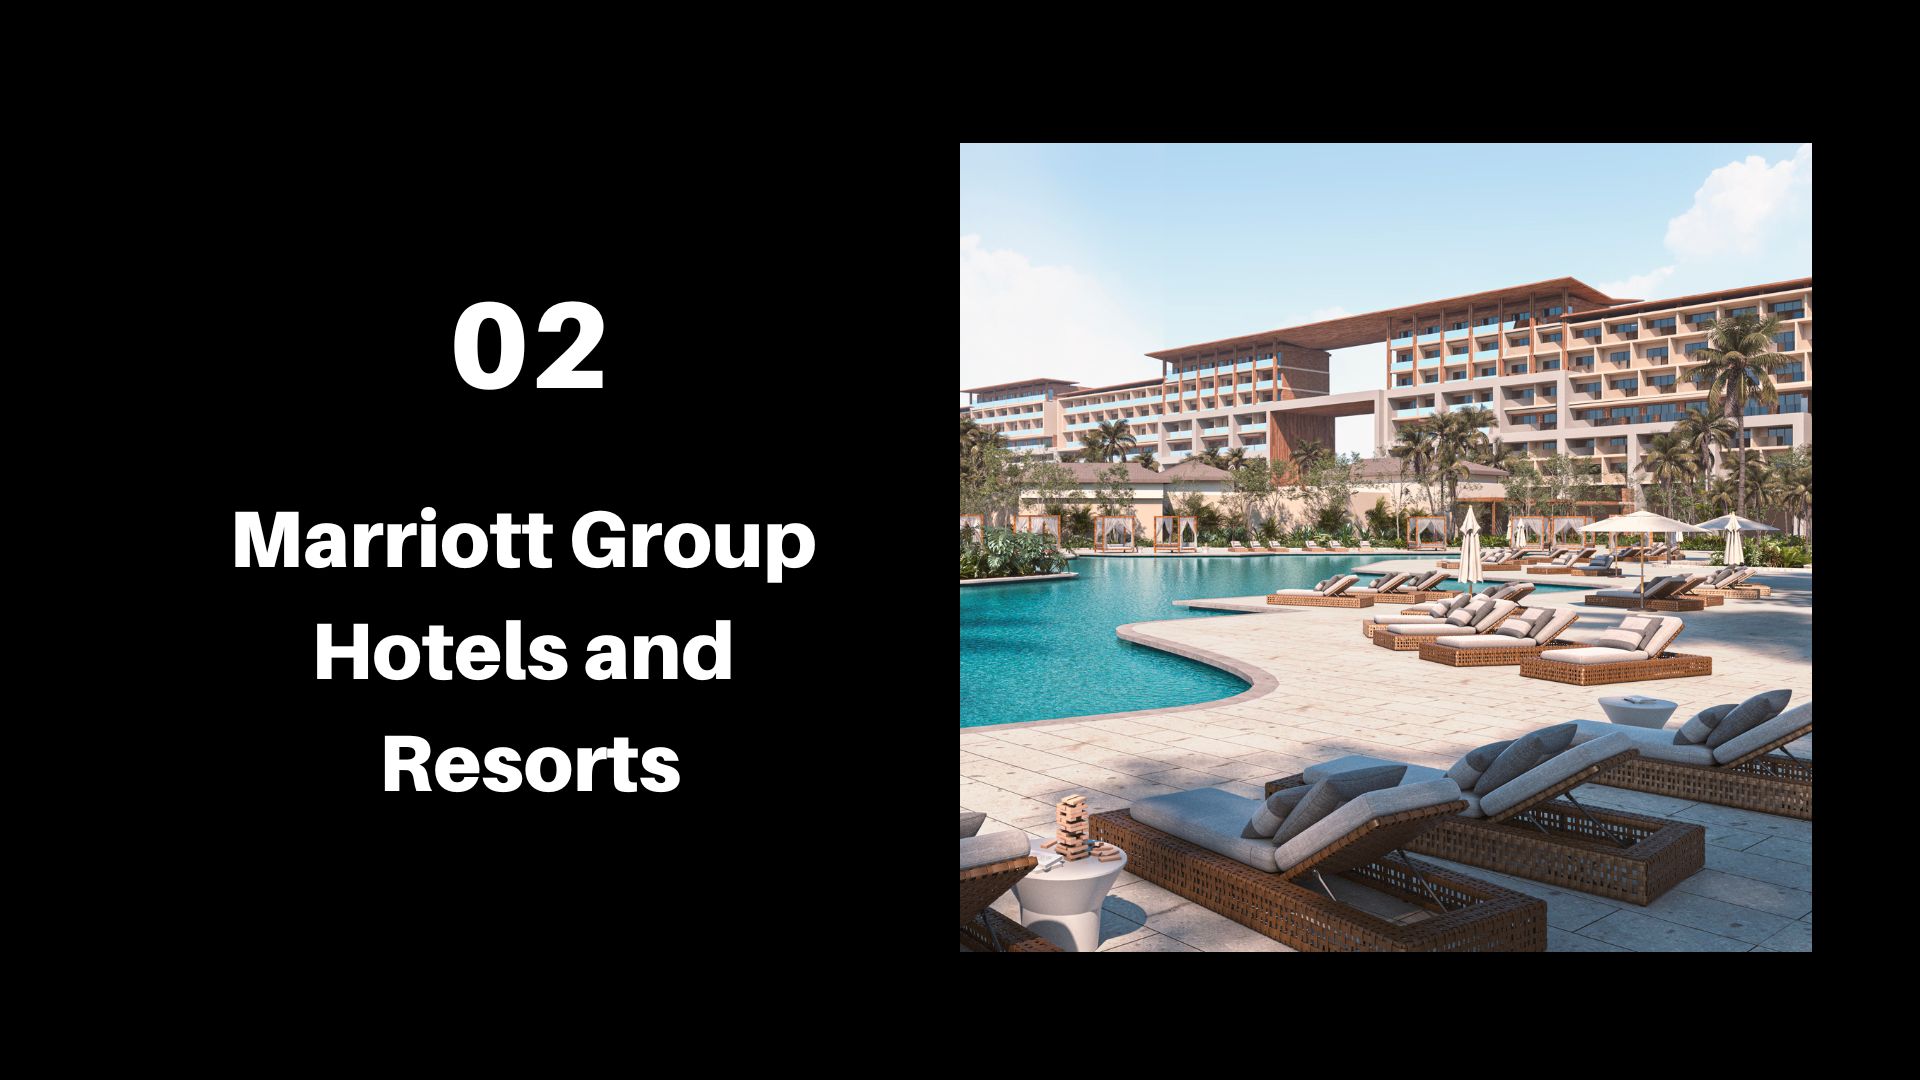 Marriott Group Hotels and Resorts